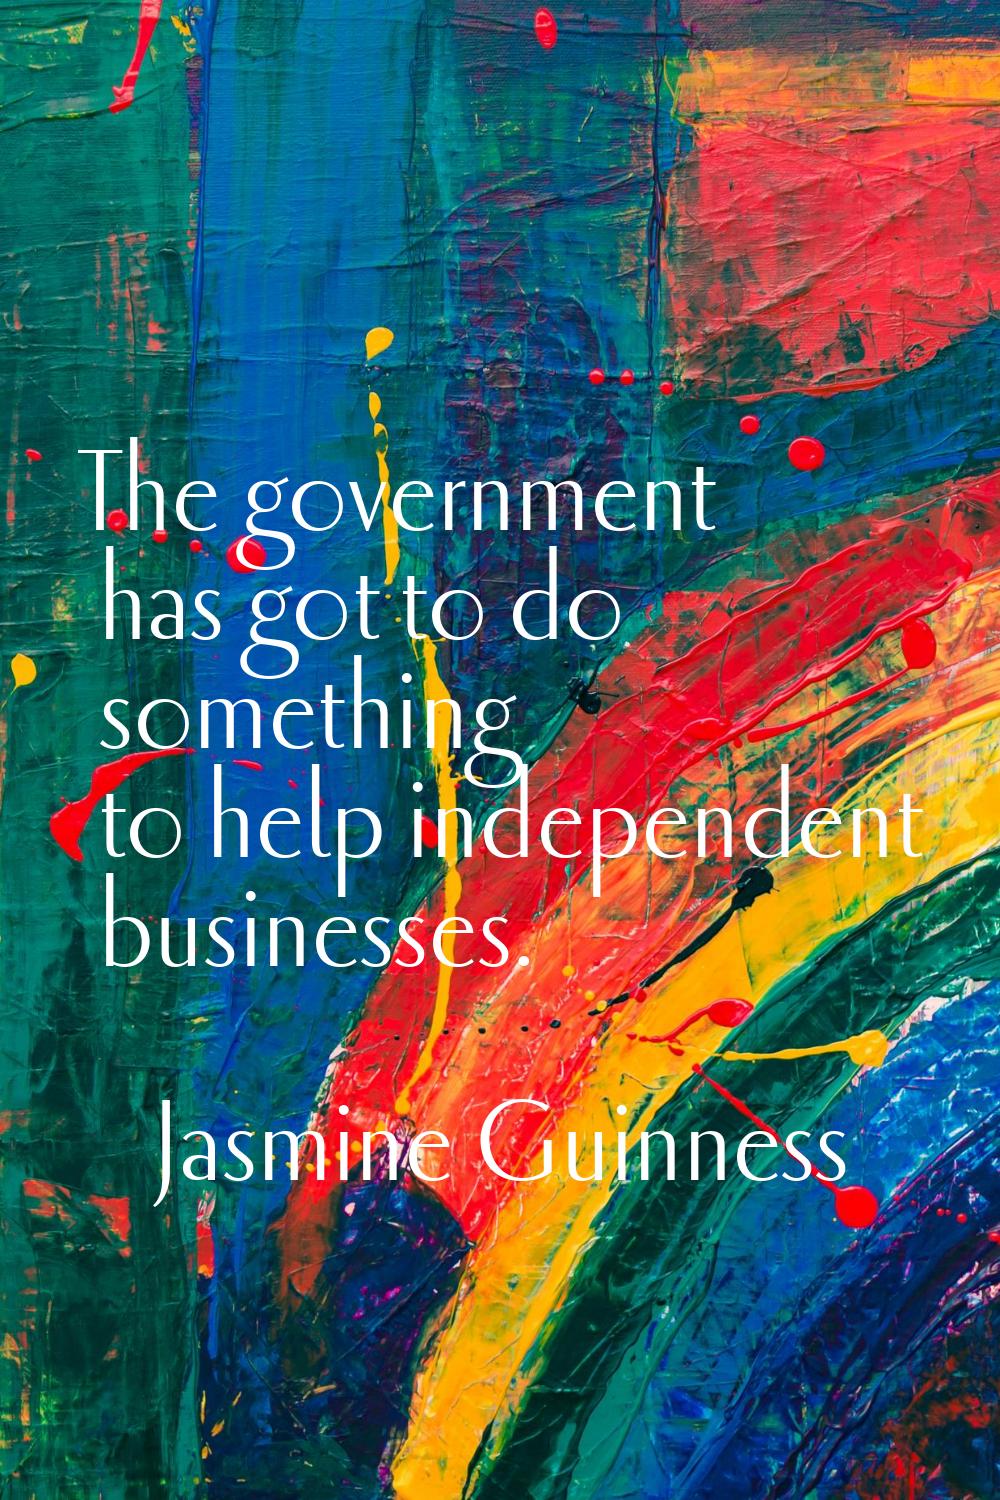 The government has got to do something to help independent businesses.